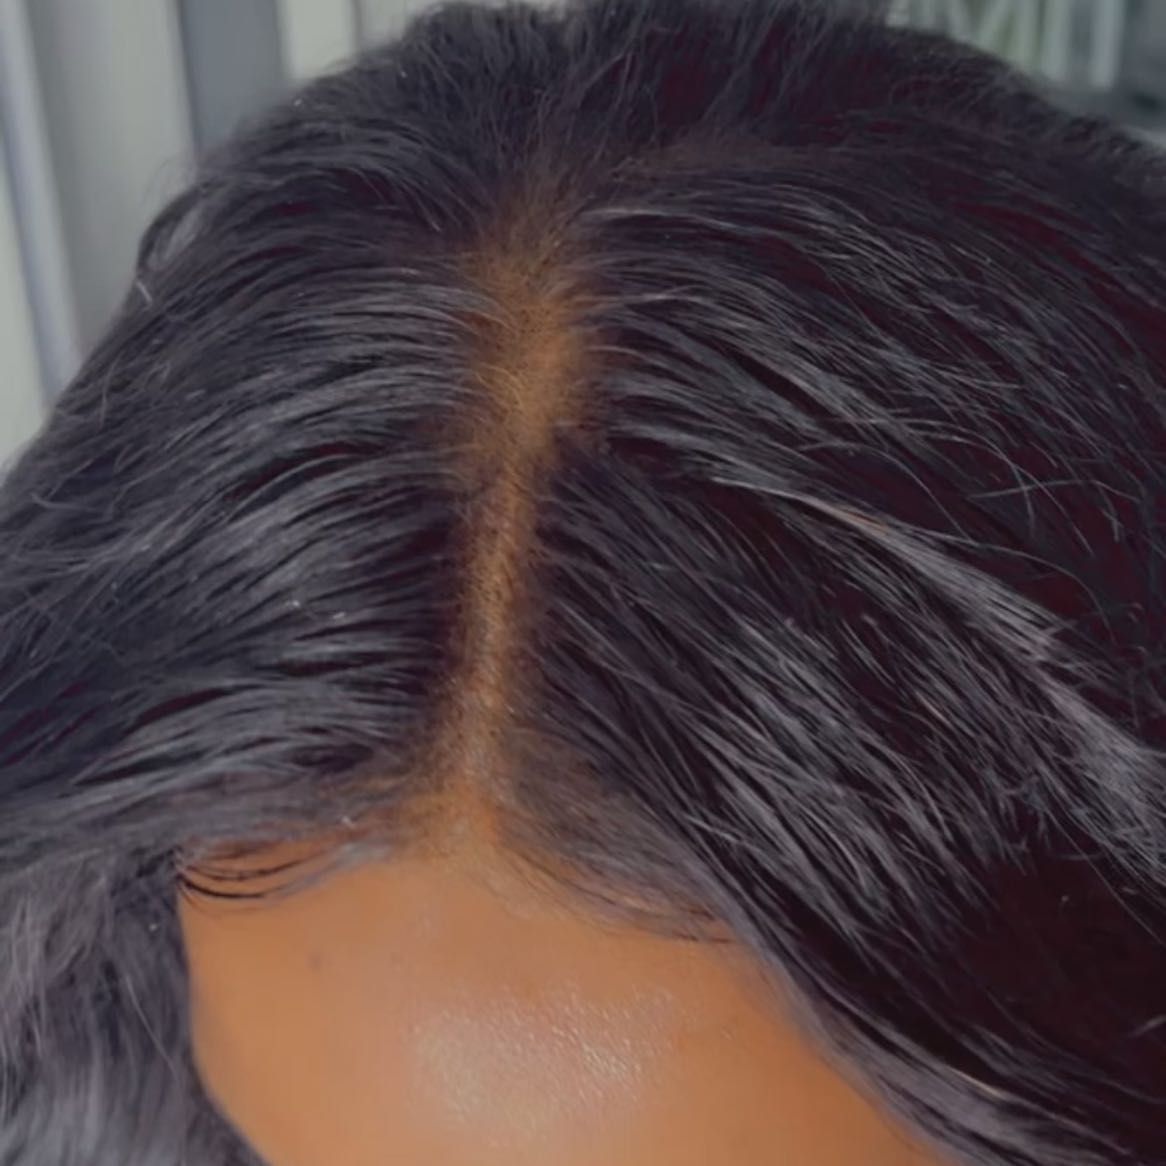 Closure wig install (with/without glue) portfolio